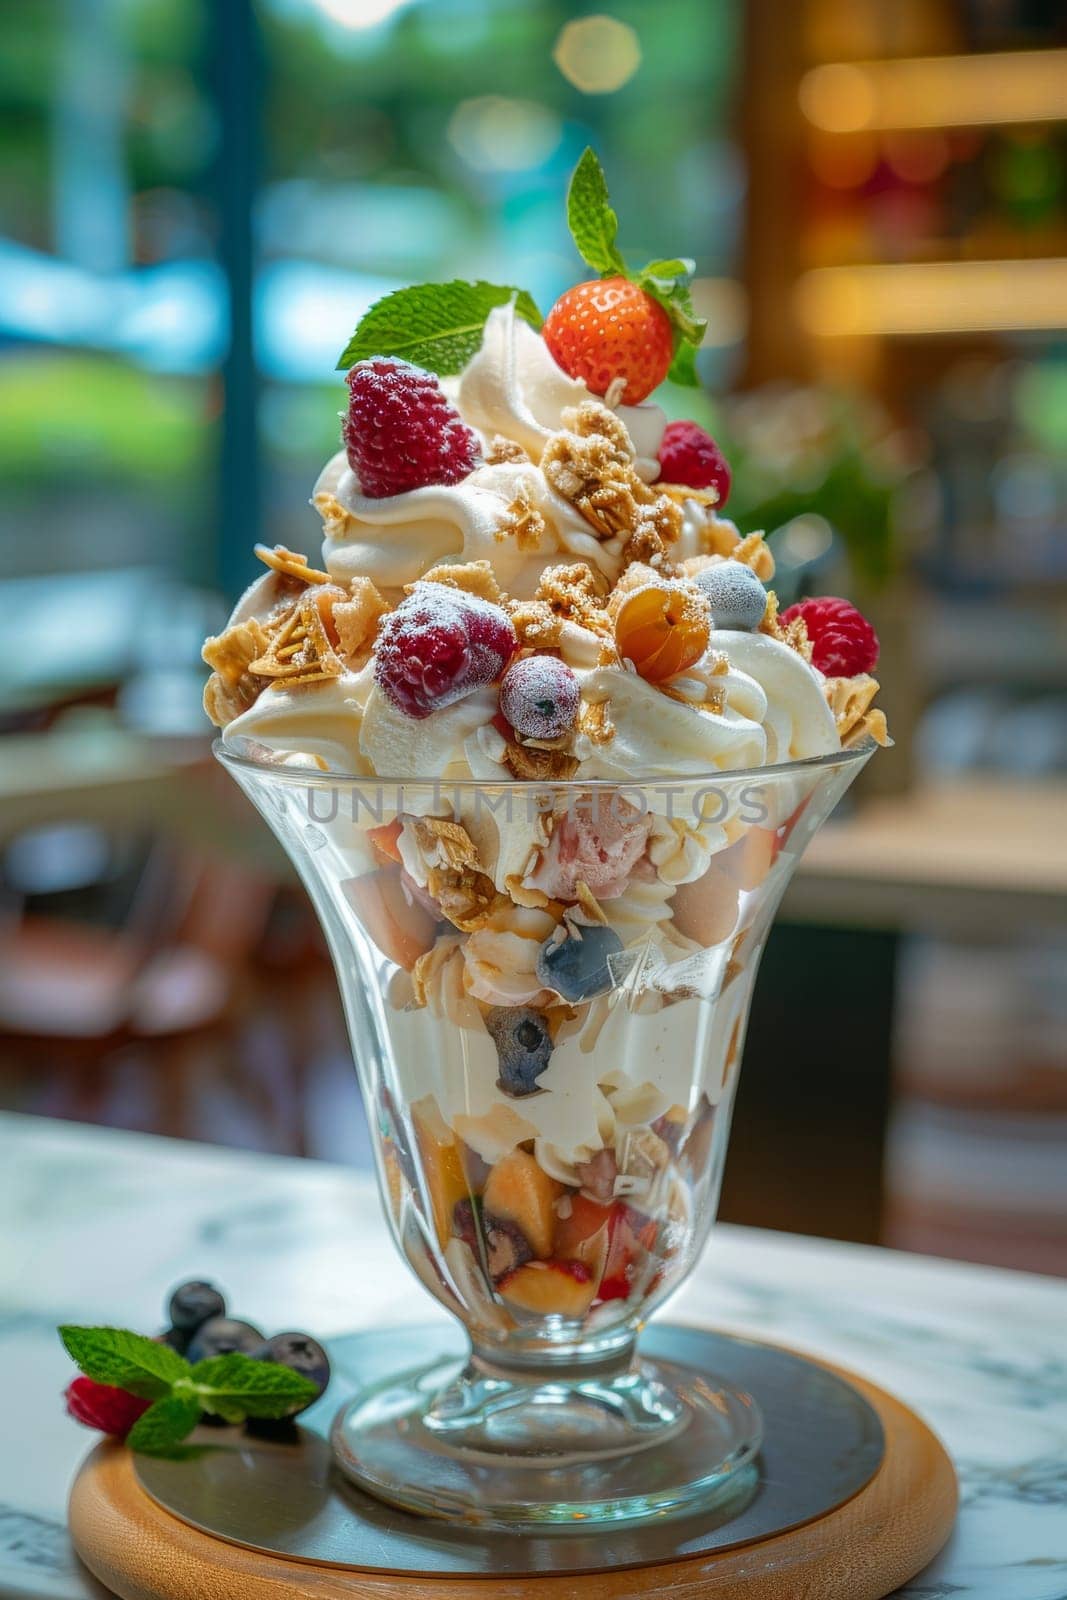 A dessert with strawberries, blueberries, and raspberries in a glass bowl. The dessert is topped with whipped cream and granola